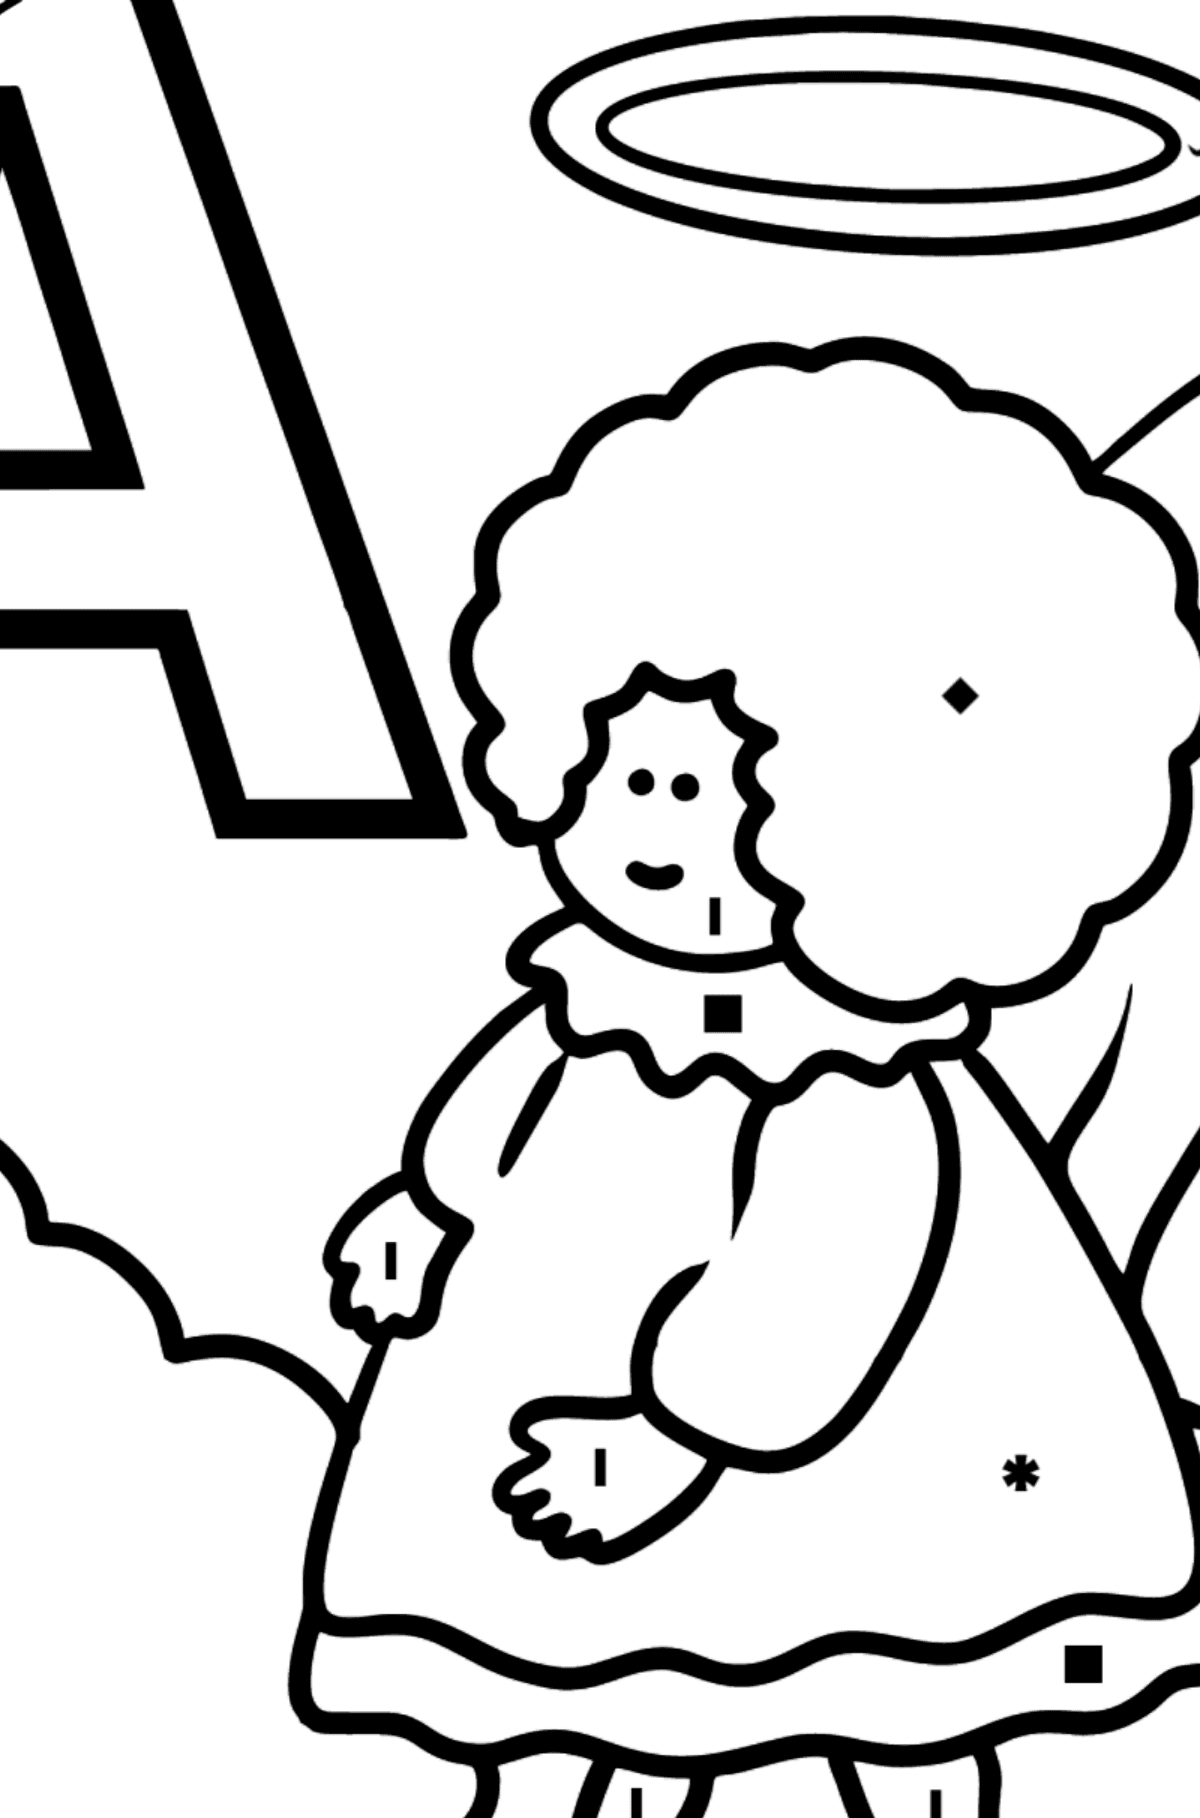 Portuguese Letter A coloring pages - ANJO - Coloring by Symbols for Kids